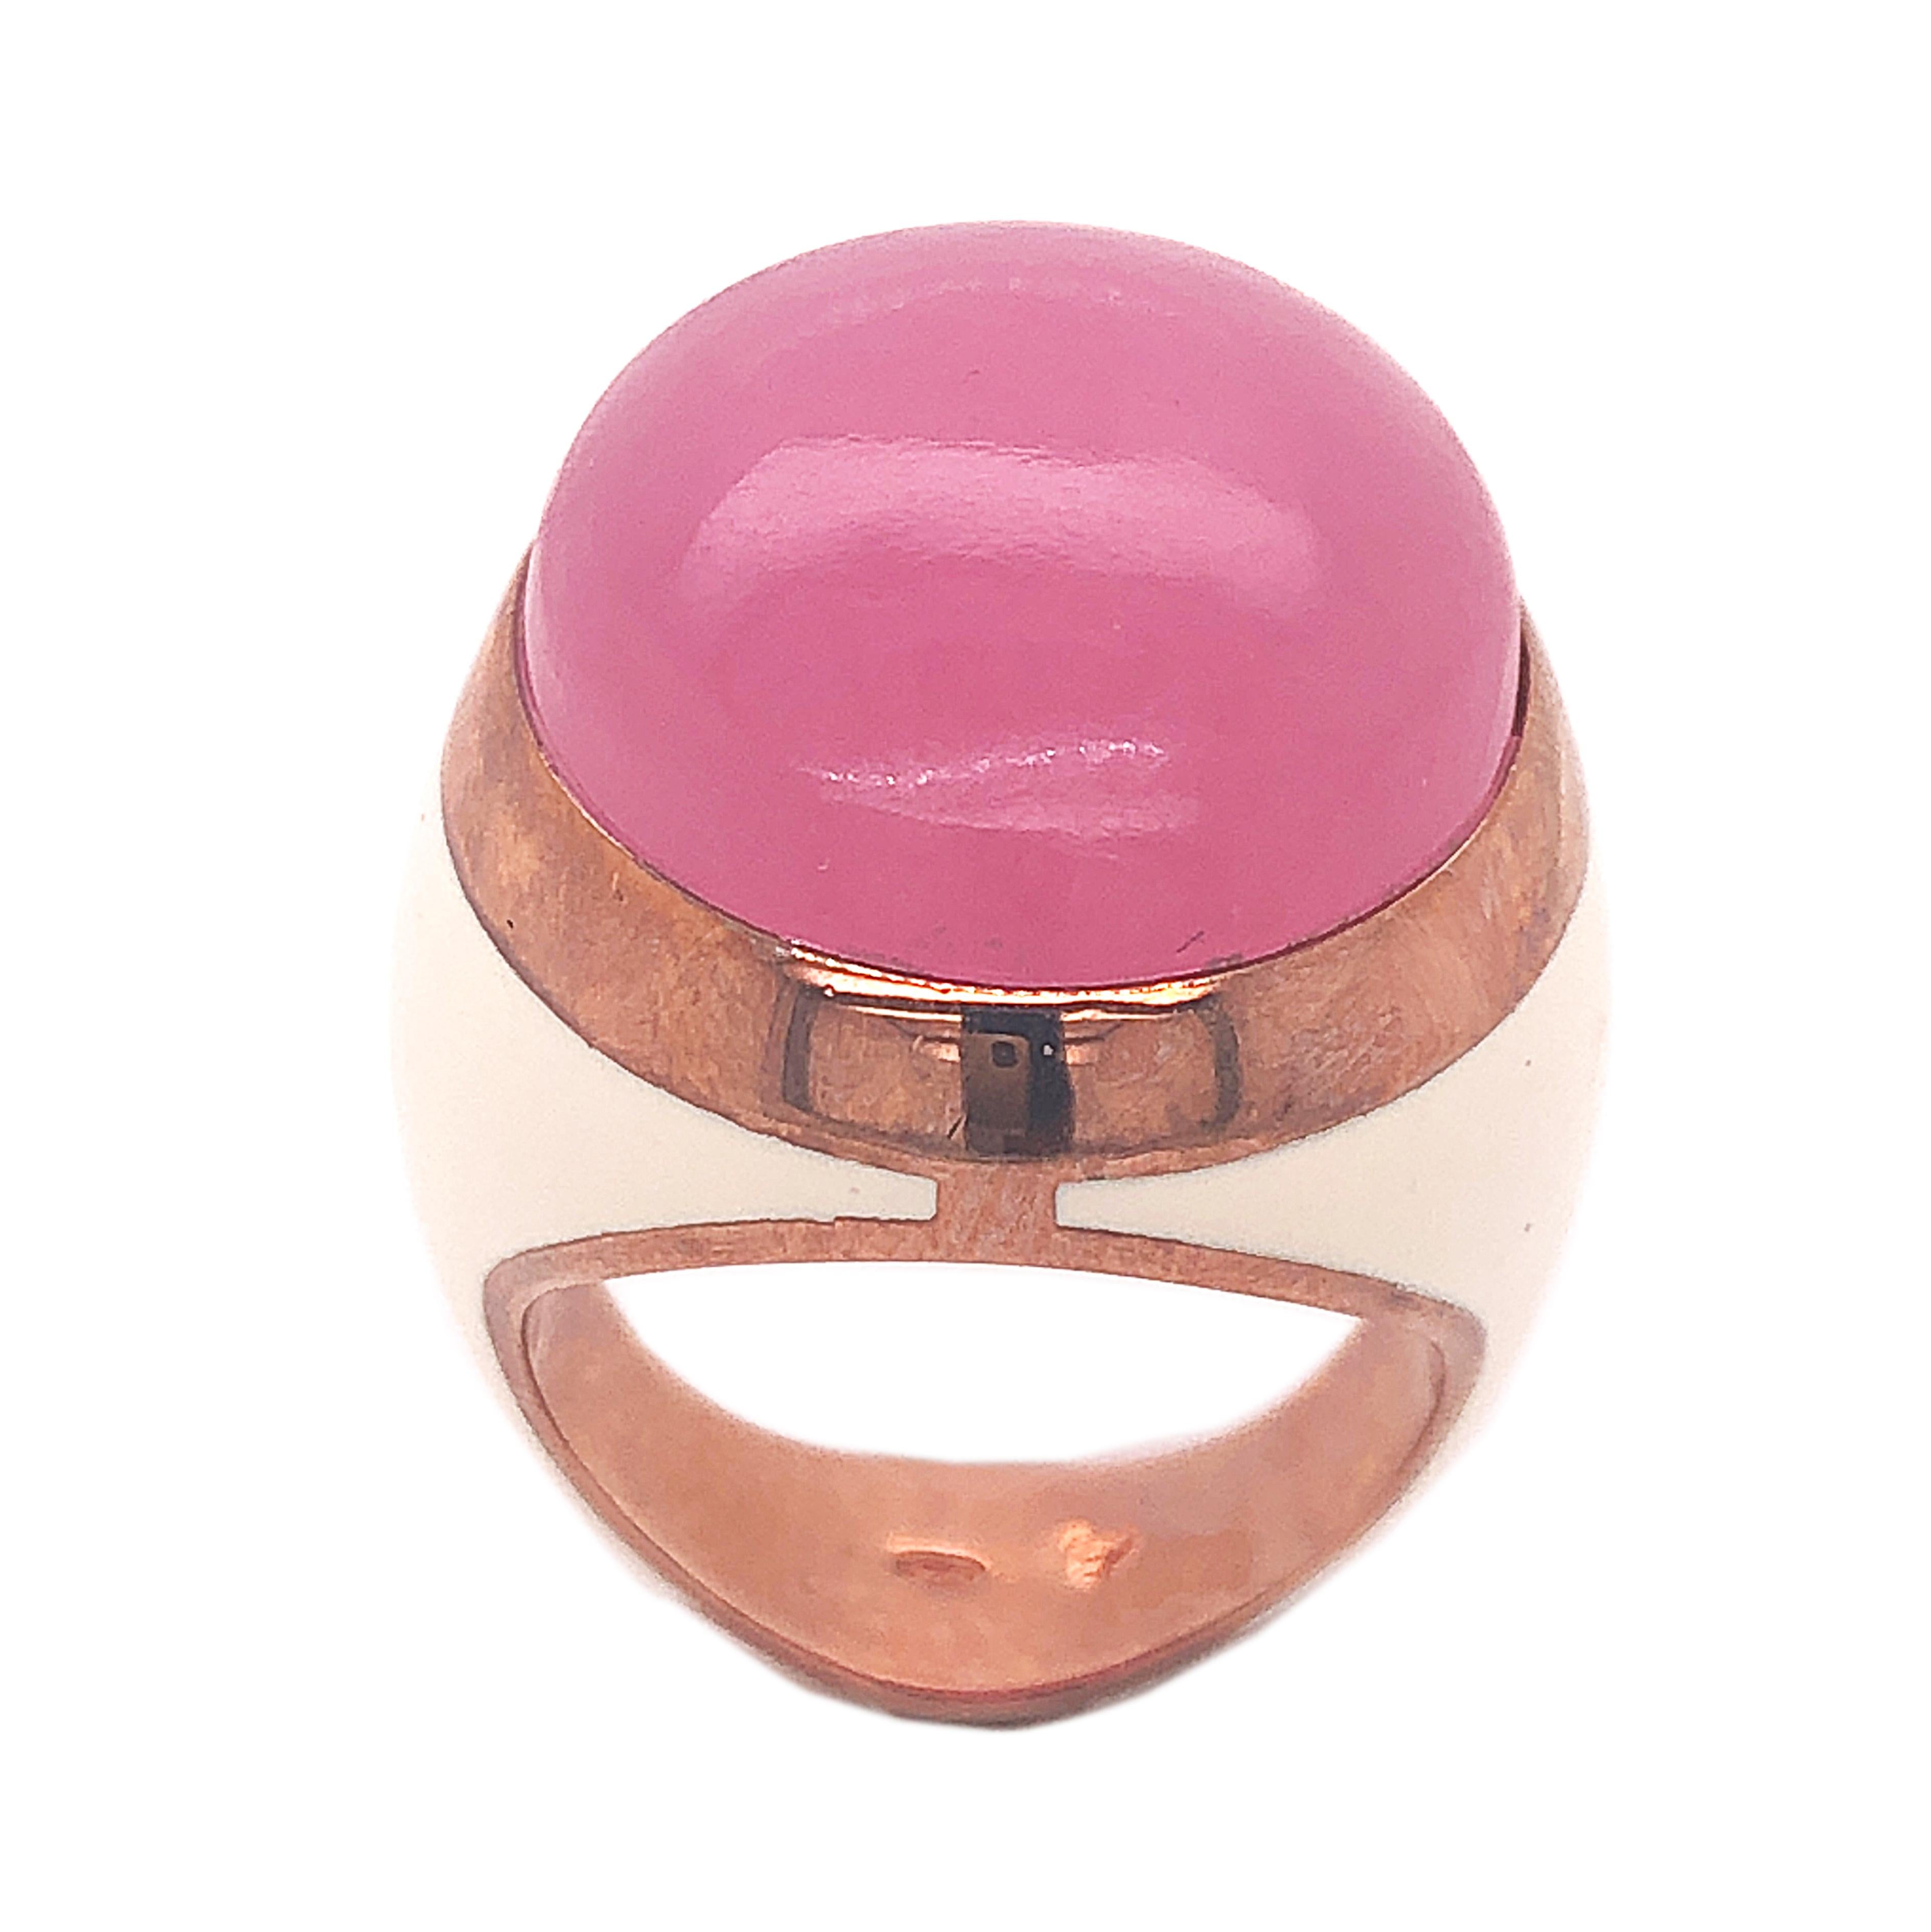 One-of-a-kind, Contemporary, Unique yet Chic Cocktail Ring Featuring a 26.5 Carat Natural Lavender Jade Cabochon (0.949x0.718in) in a Beige Hand Enameled Rose Oxidized Sterling Silver Setting.
The color-changing of the Lavender Jade's cabochon